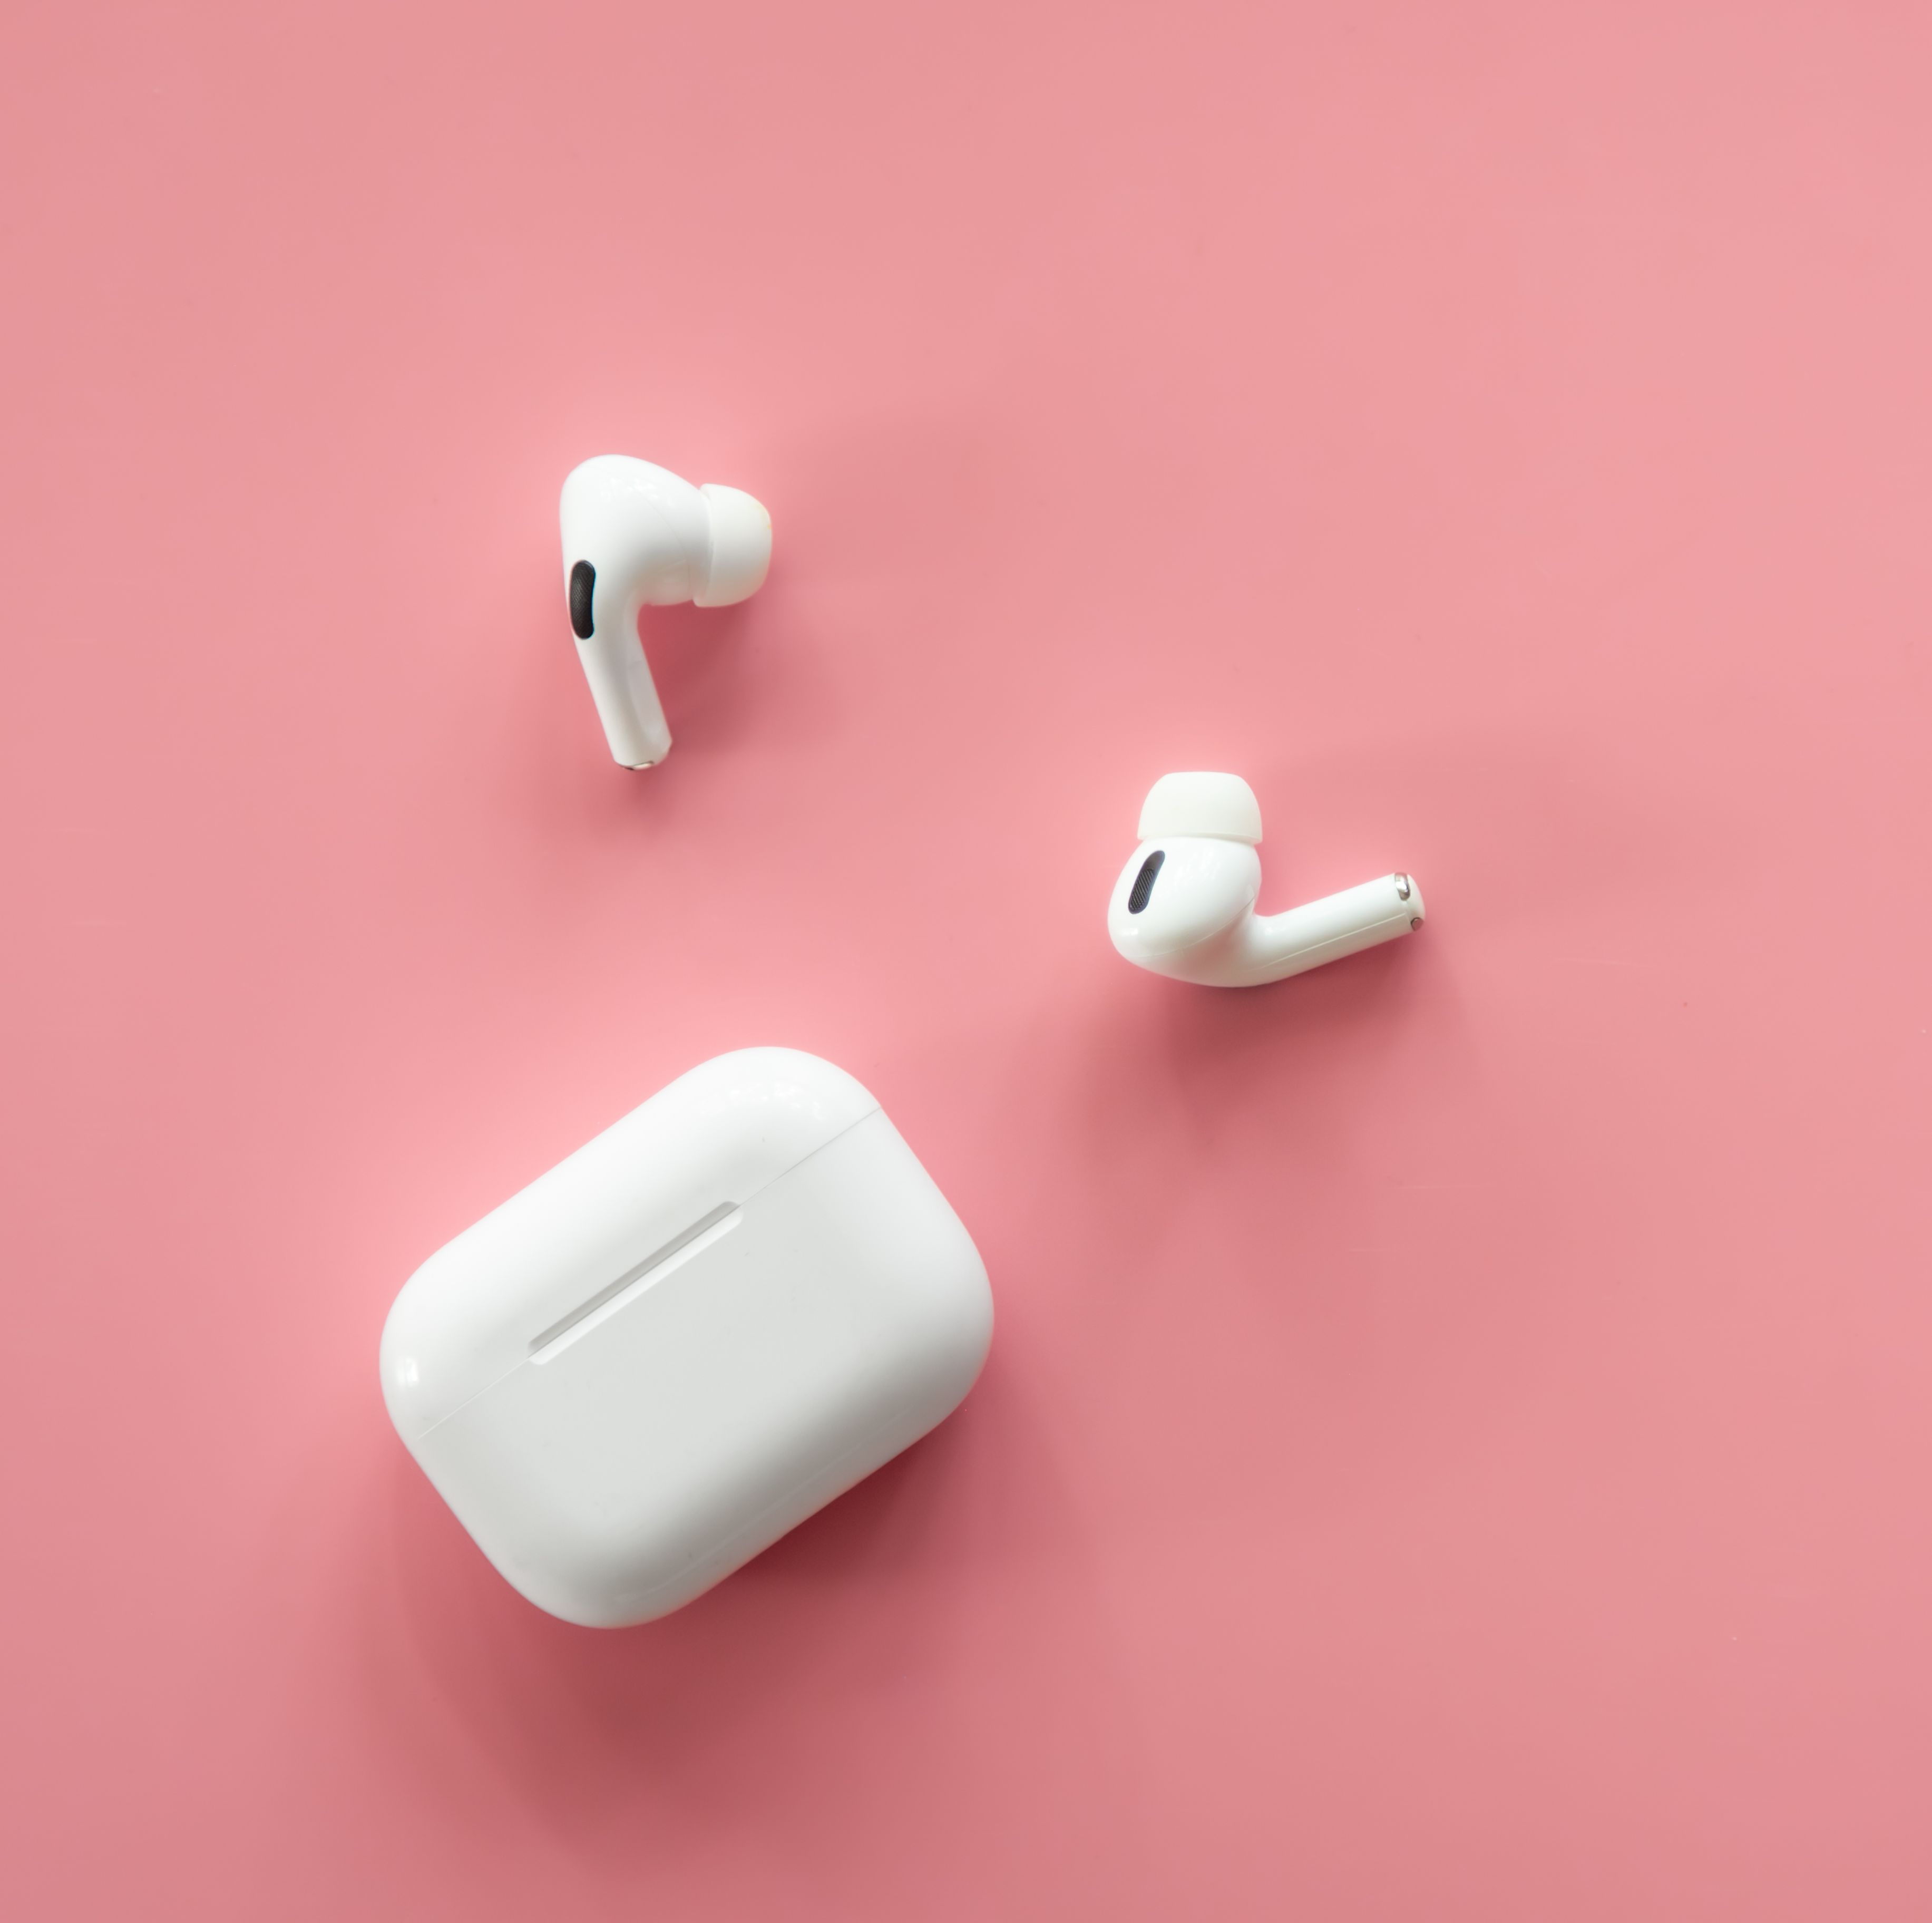 Amazon Just Dropped the Apple AirPods Pro 2 to Its Lowest Price Ever